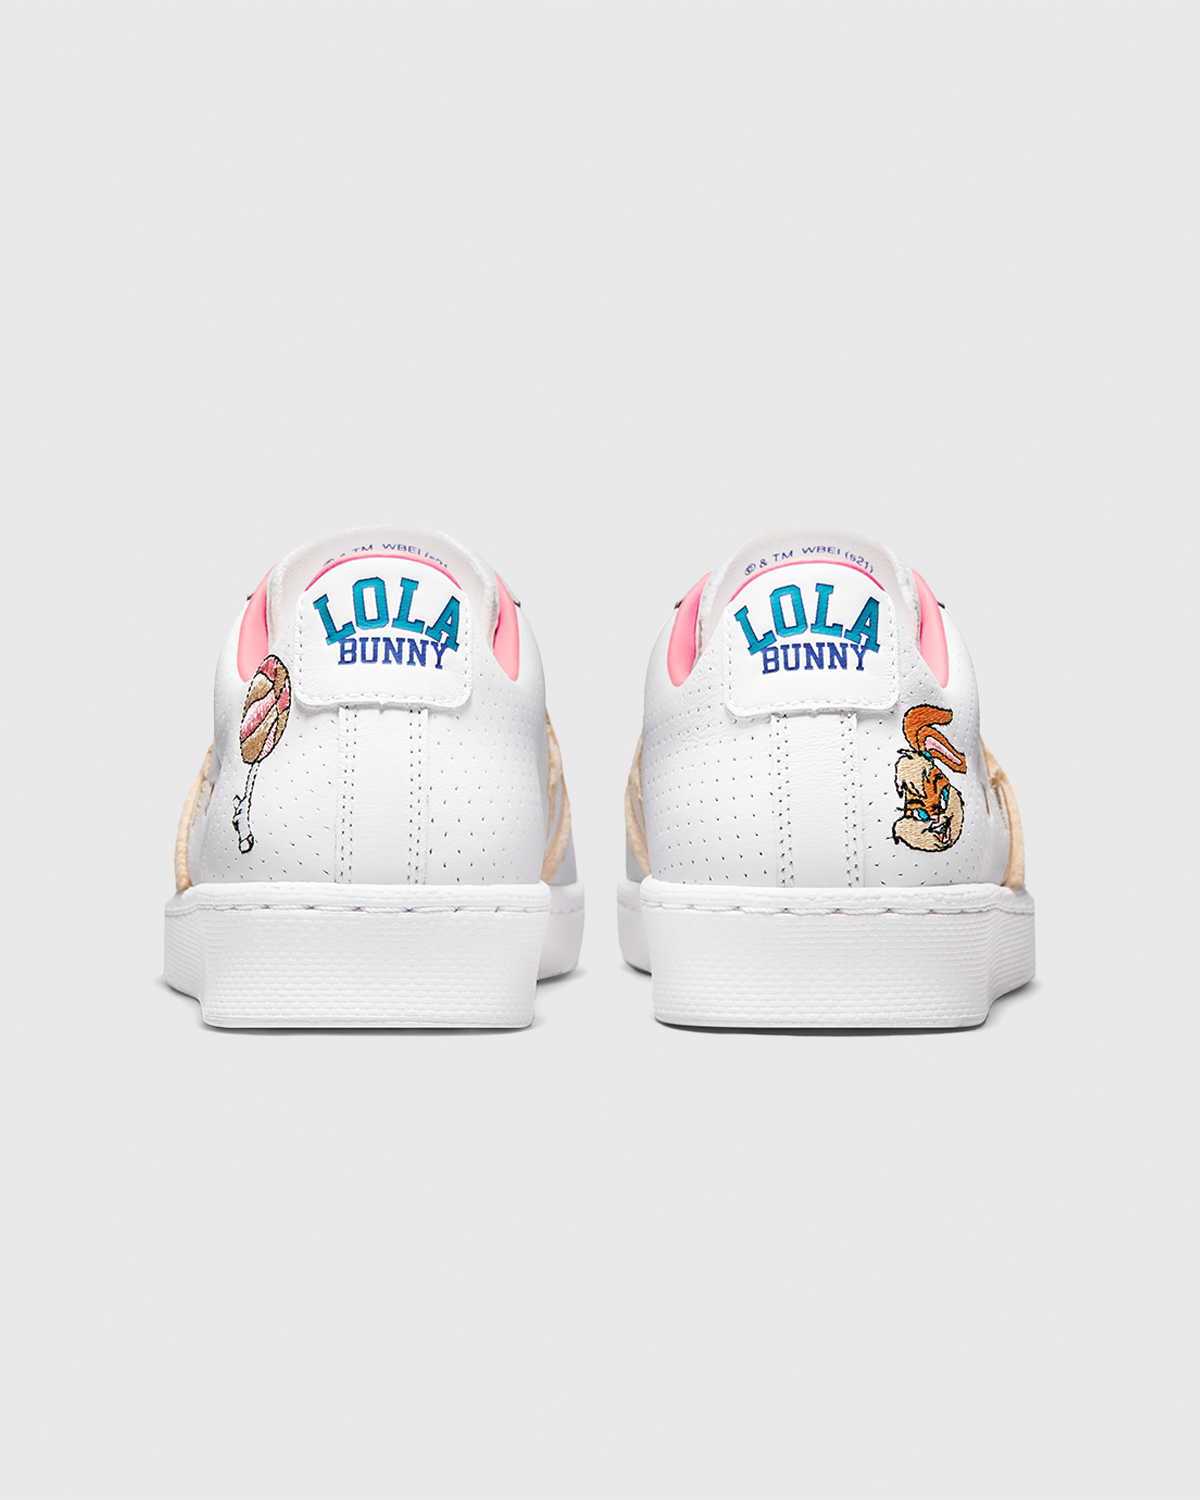 converse-space-jam-2-pack-release-date-price-lola-bunny-06